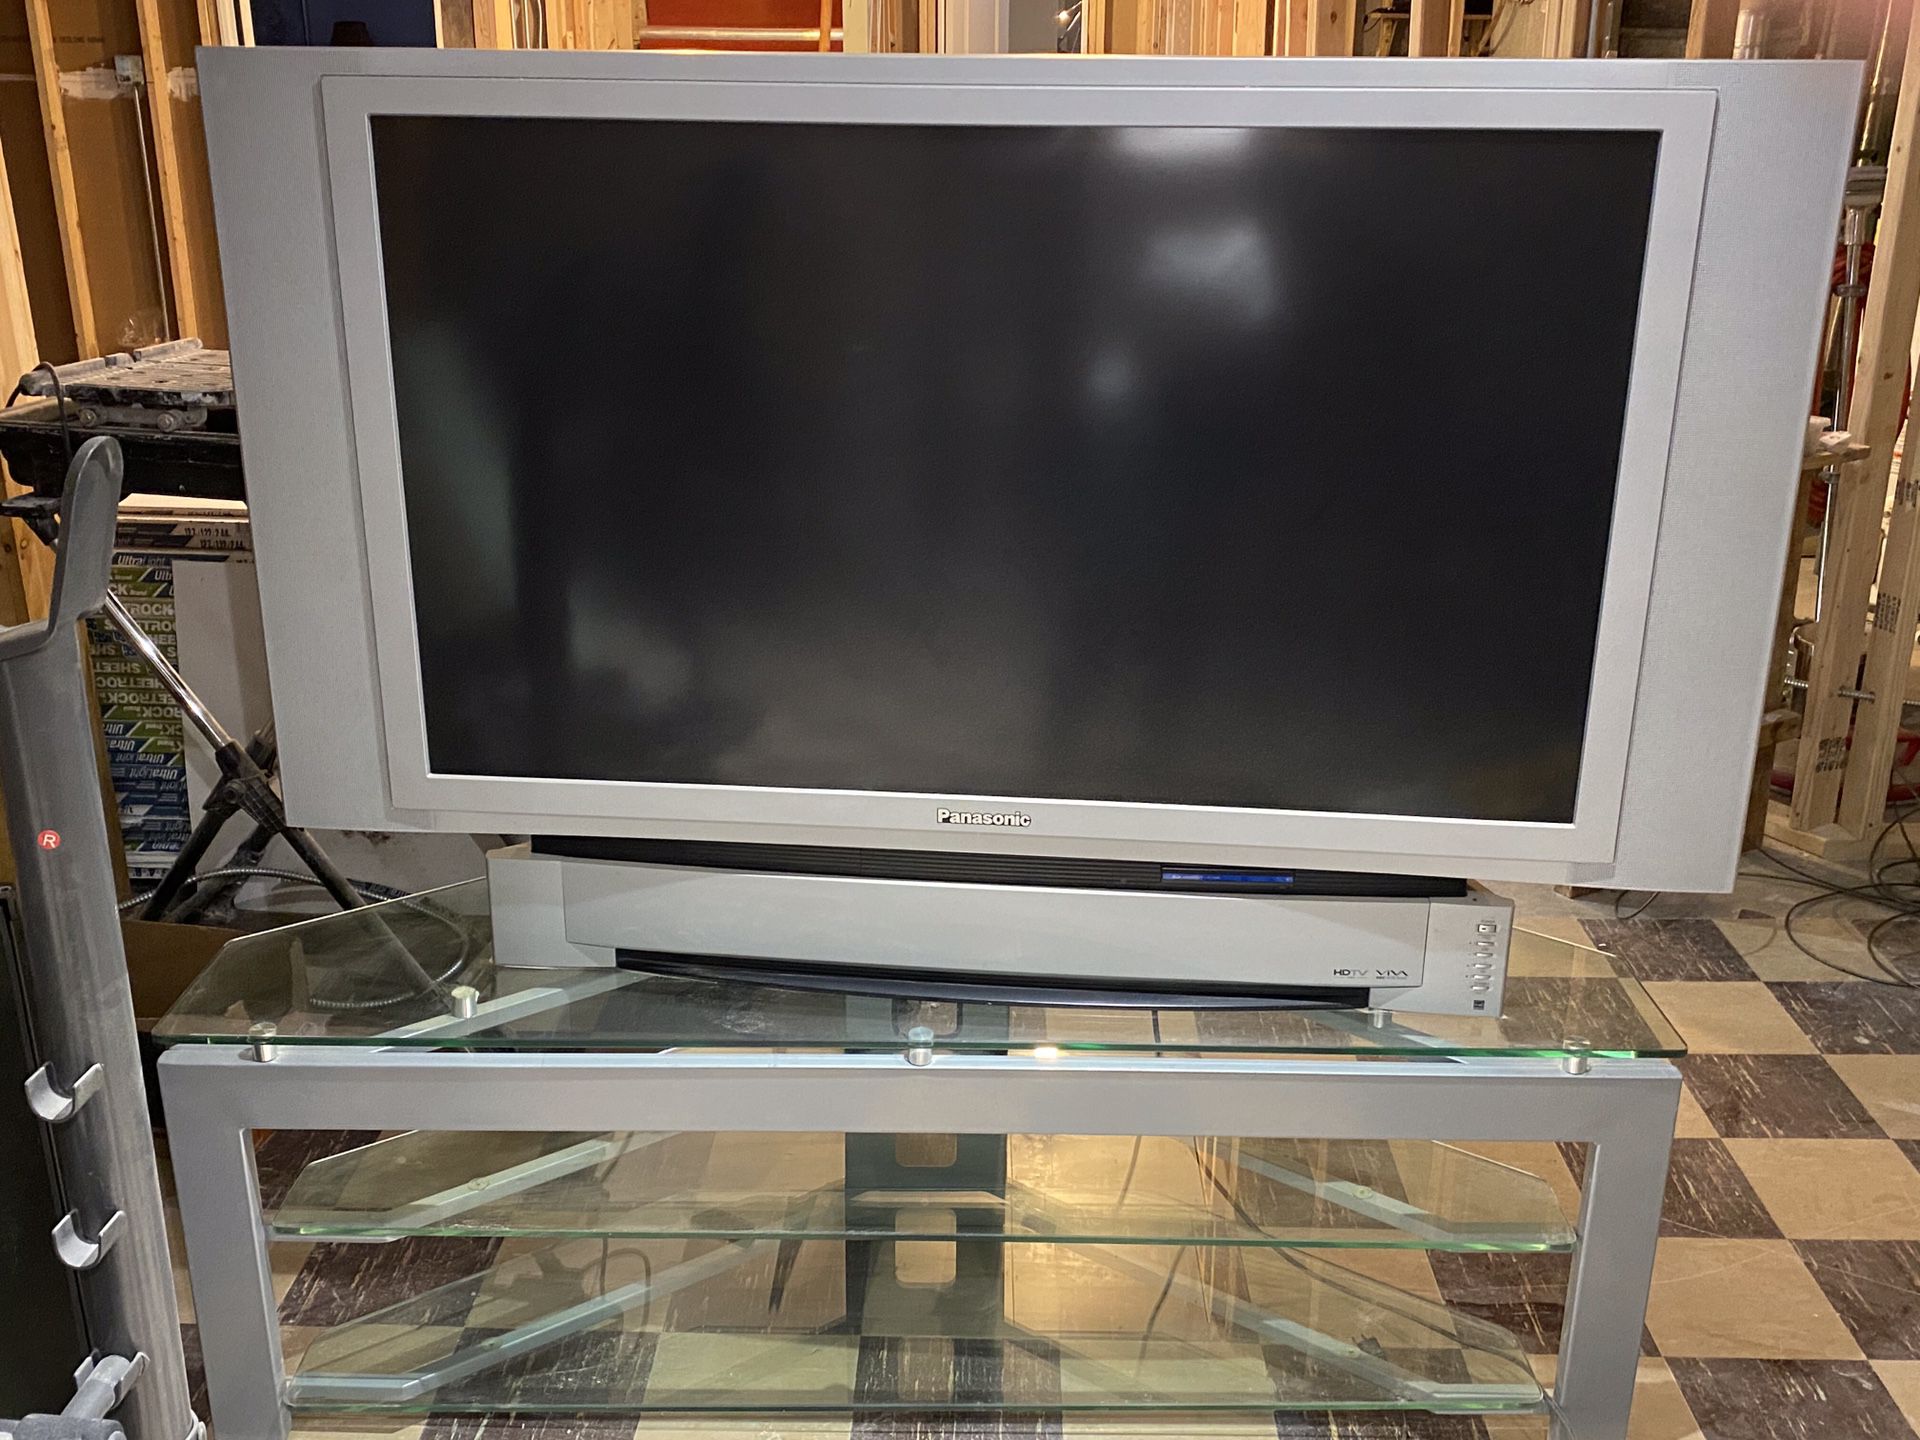 Panasonic 48” HD-TV (glass stand included)